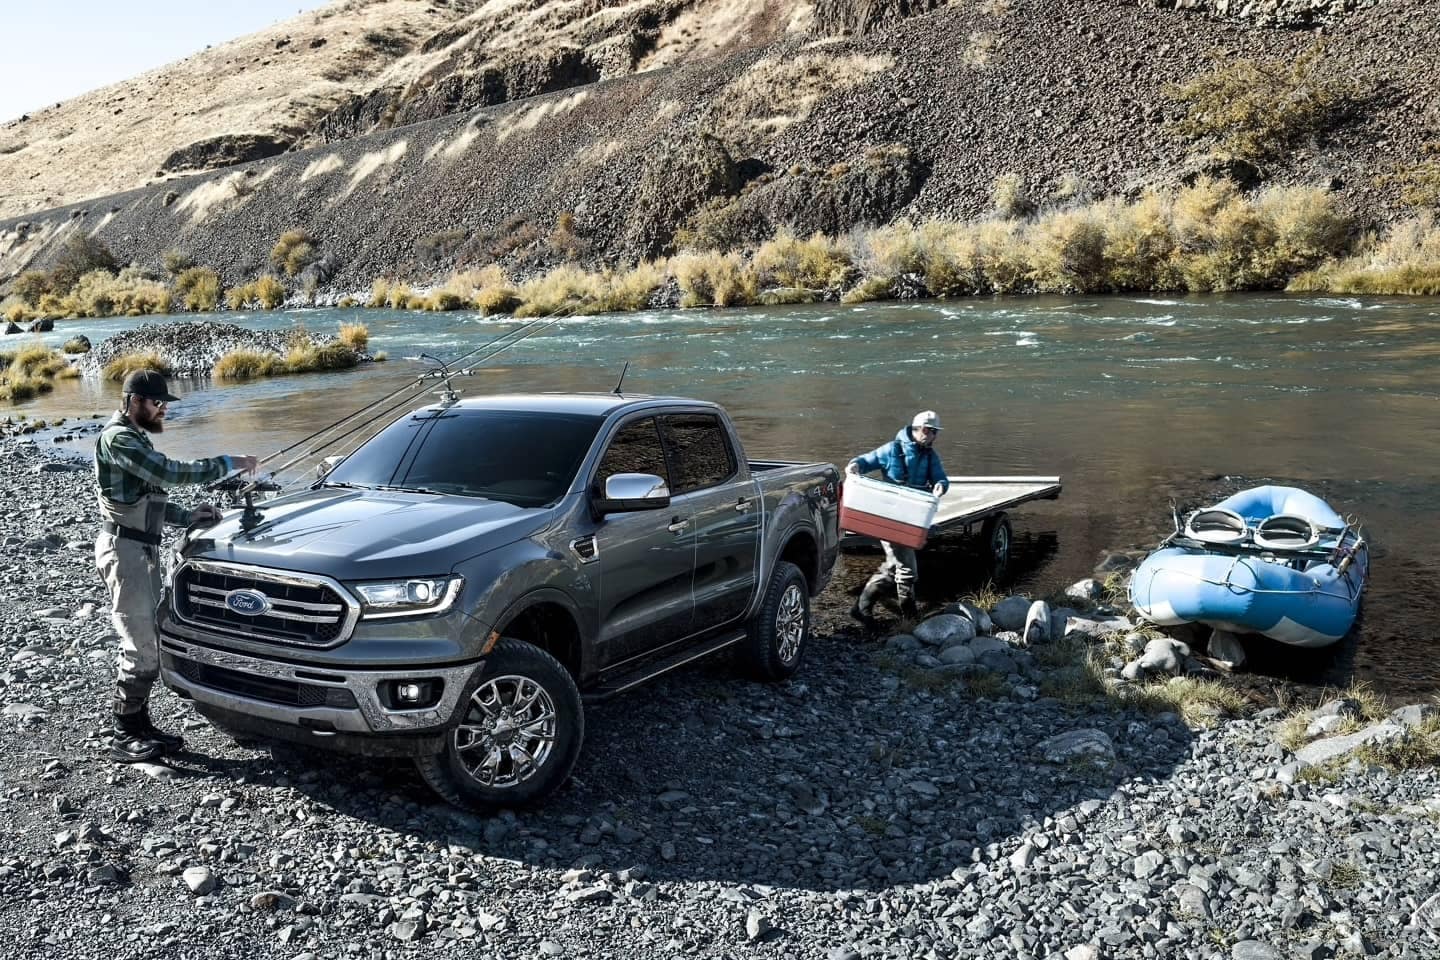 New Ford Ranger Lariat parked near a river with two fishermen and a raft.